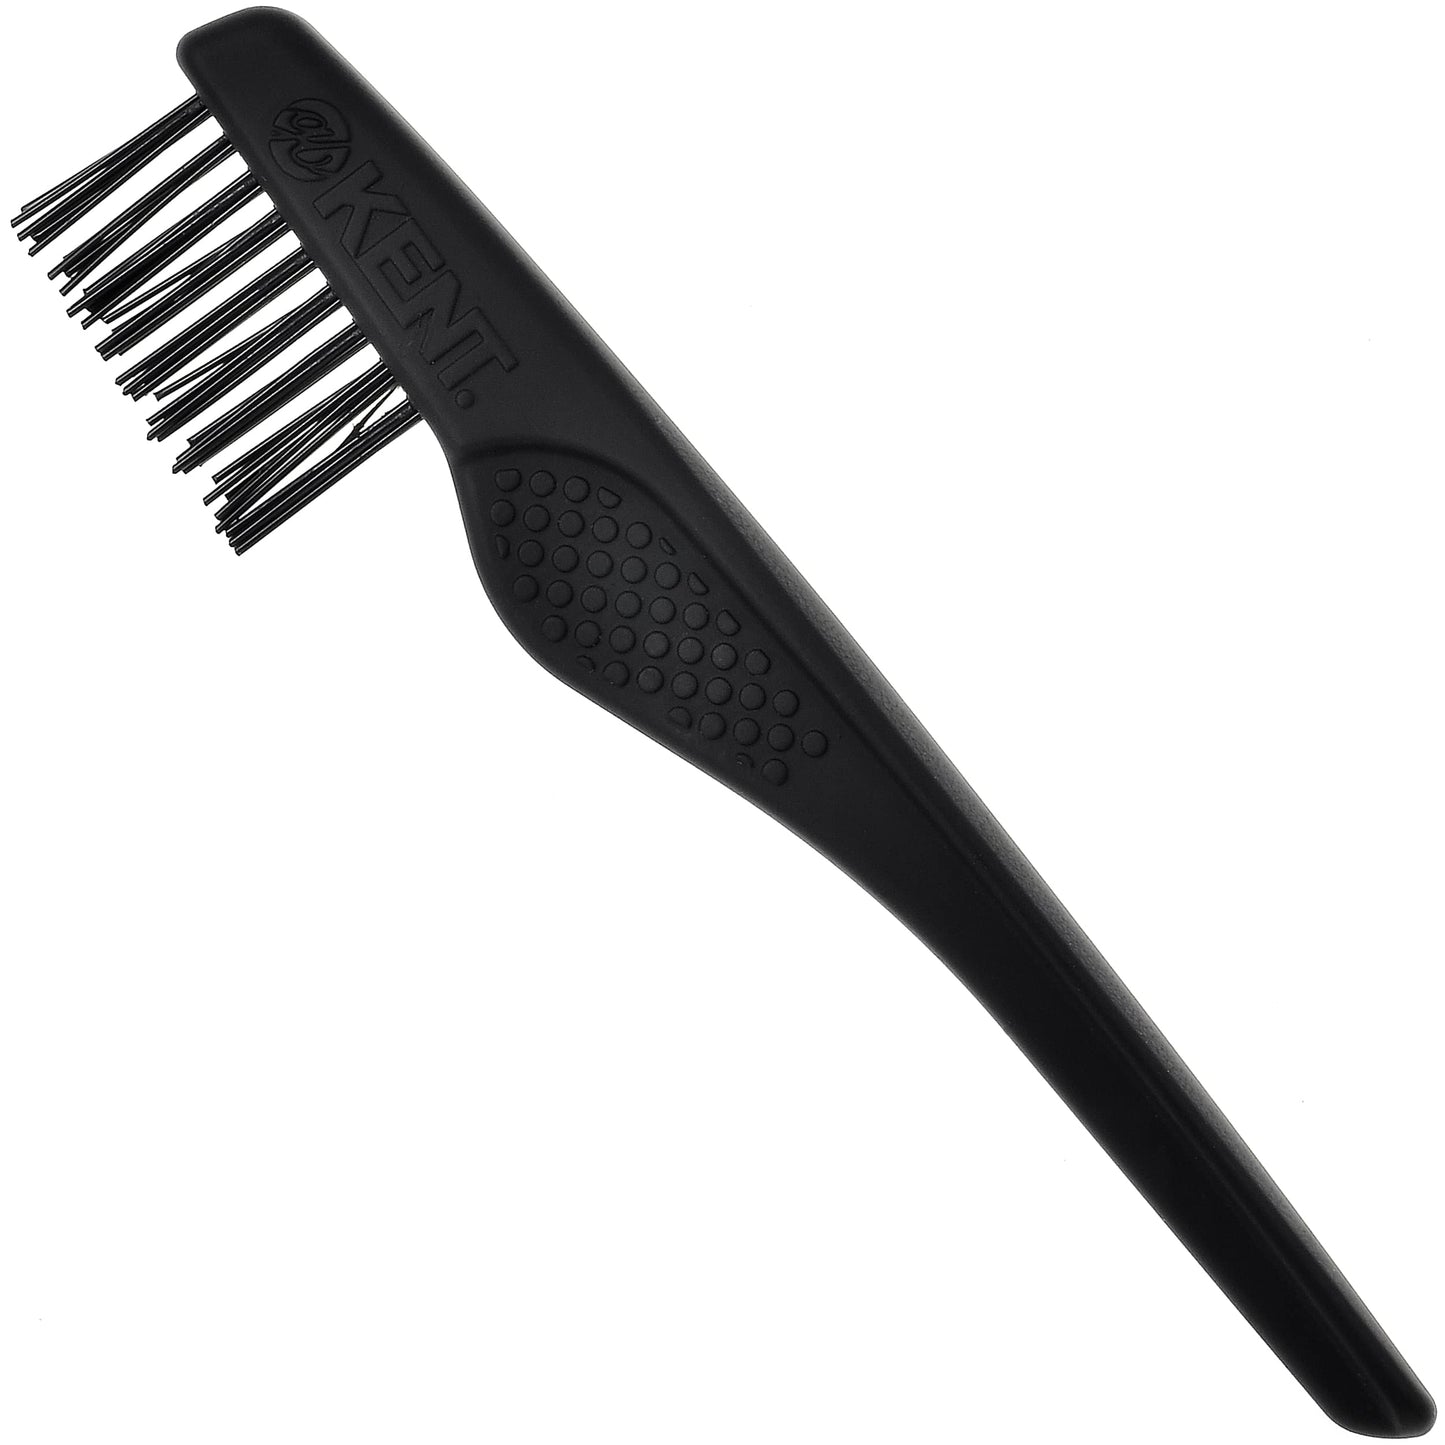 Hairbrush and Comb Cleaner